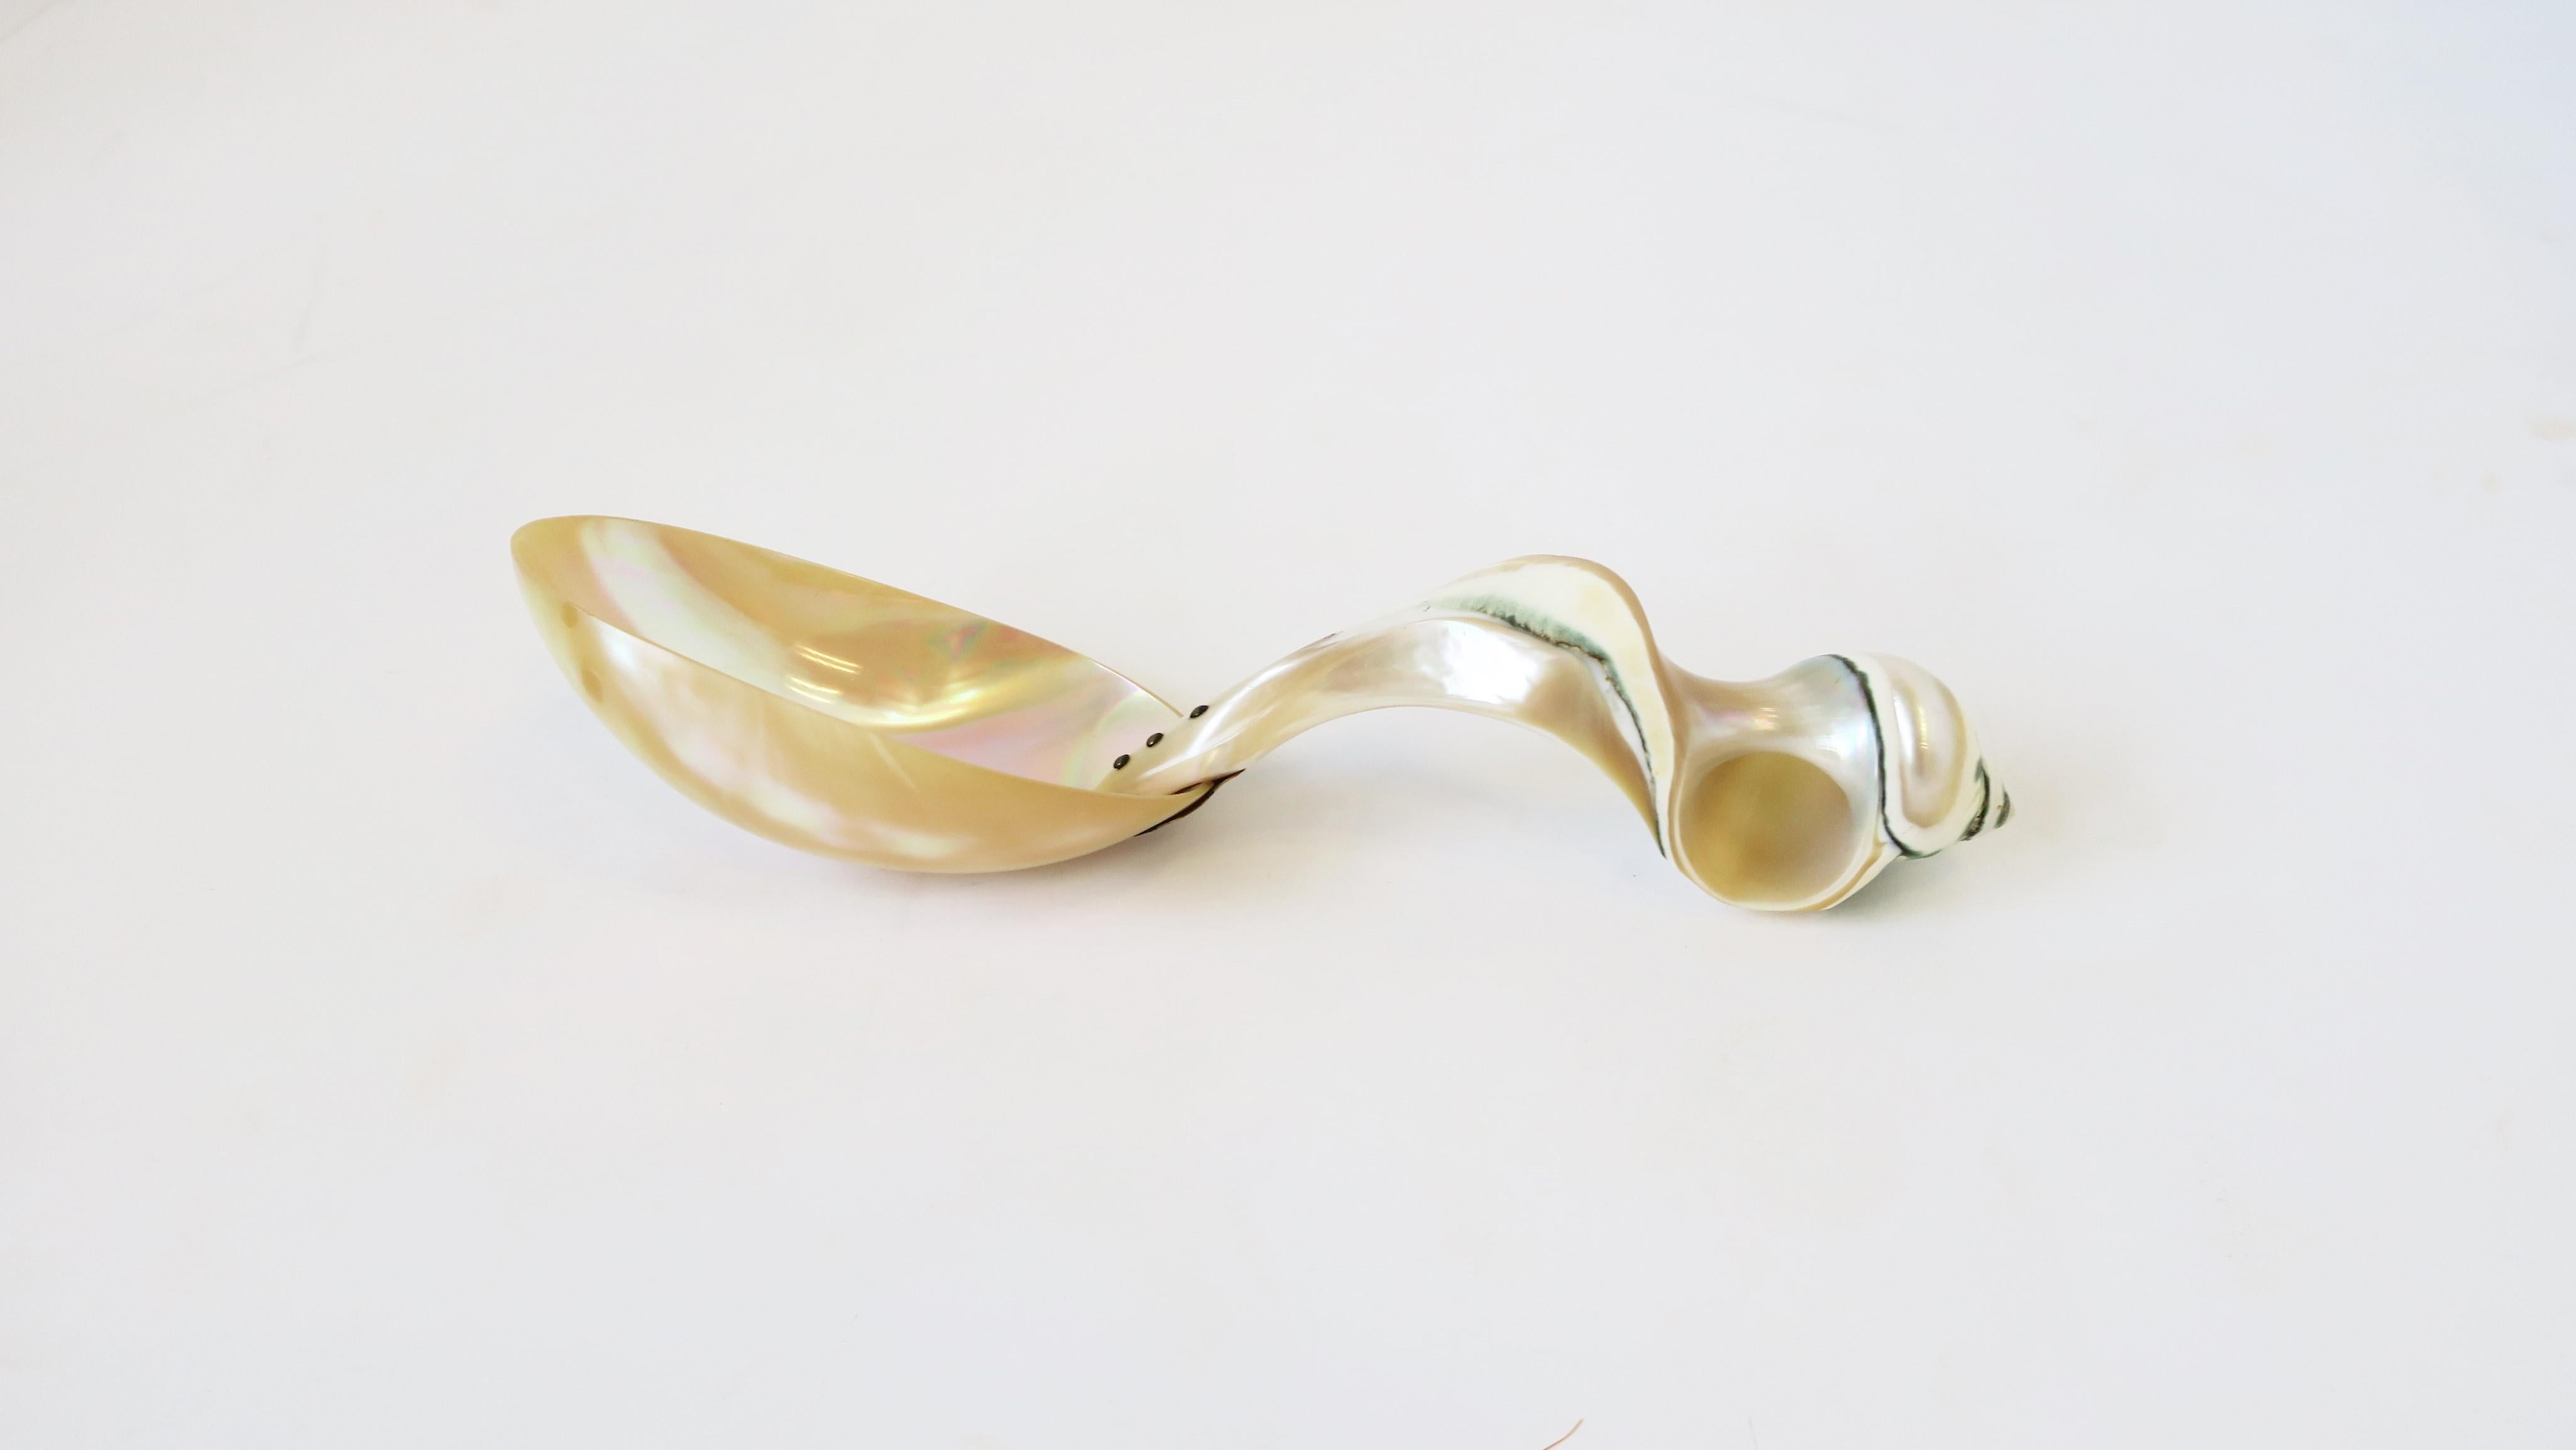 Mother of Pearl Seashell Spoon or Caviar Vessel For Sale 2